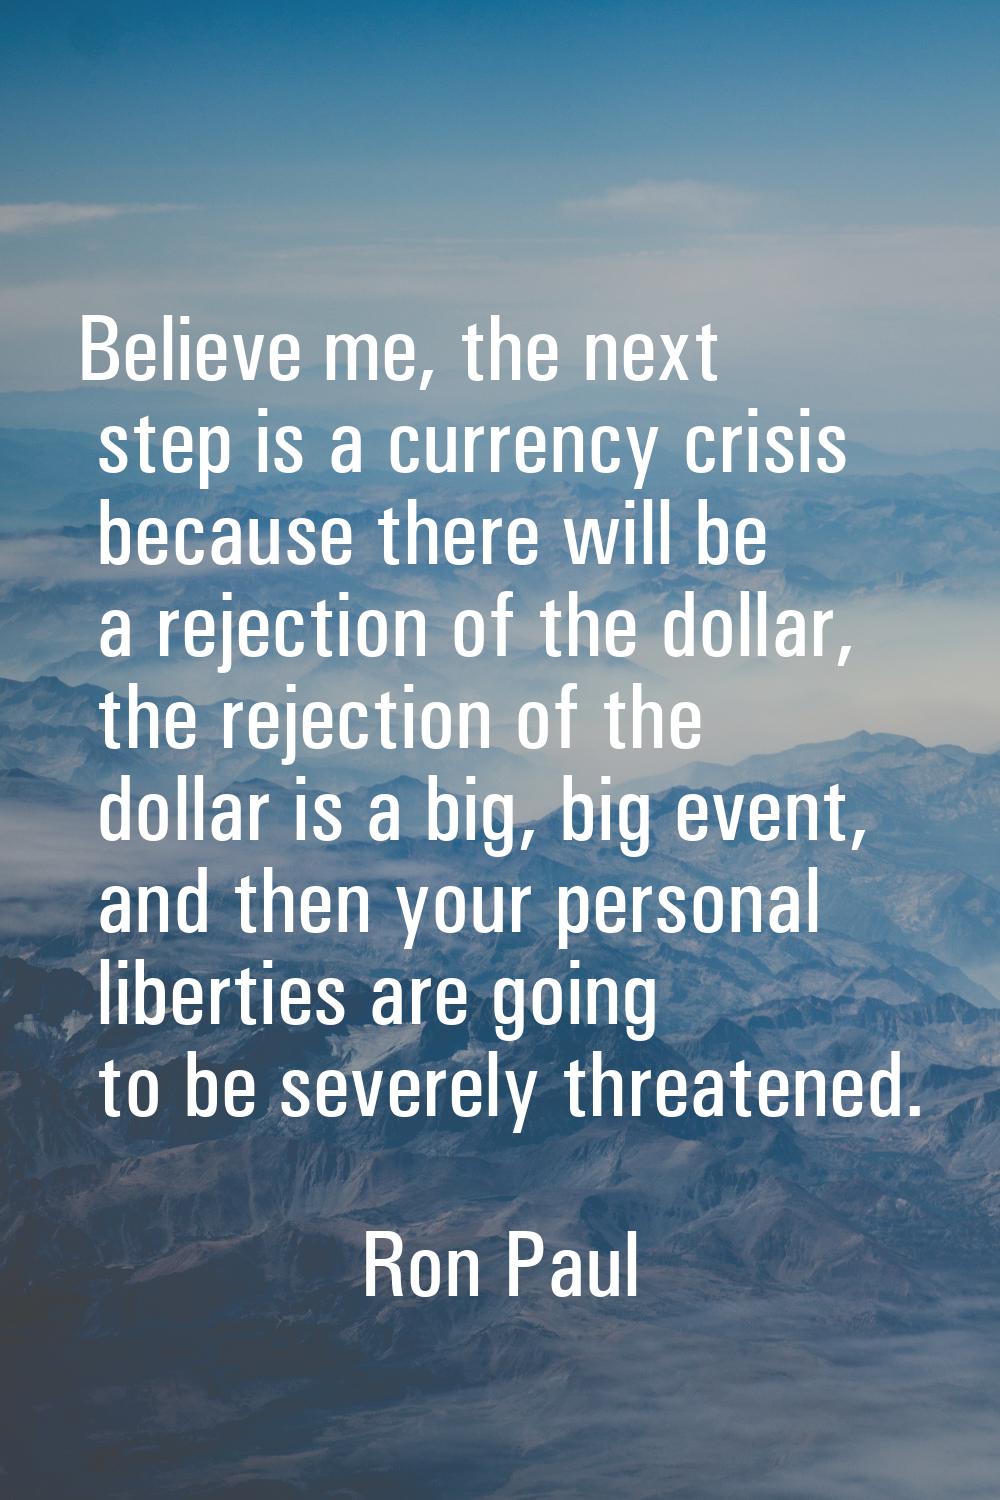 Believe me, the next step is a currency crisis because there will be a rejection of the dollar, the